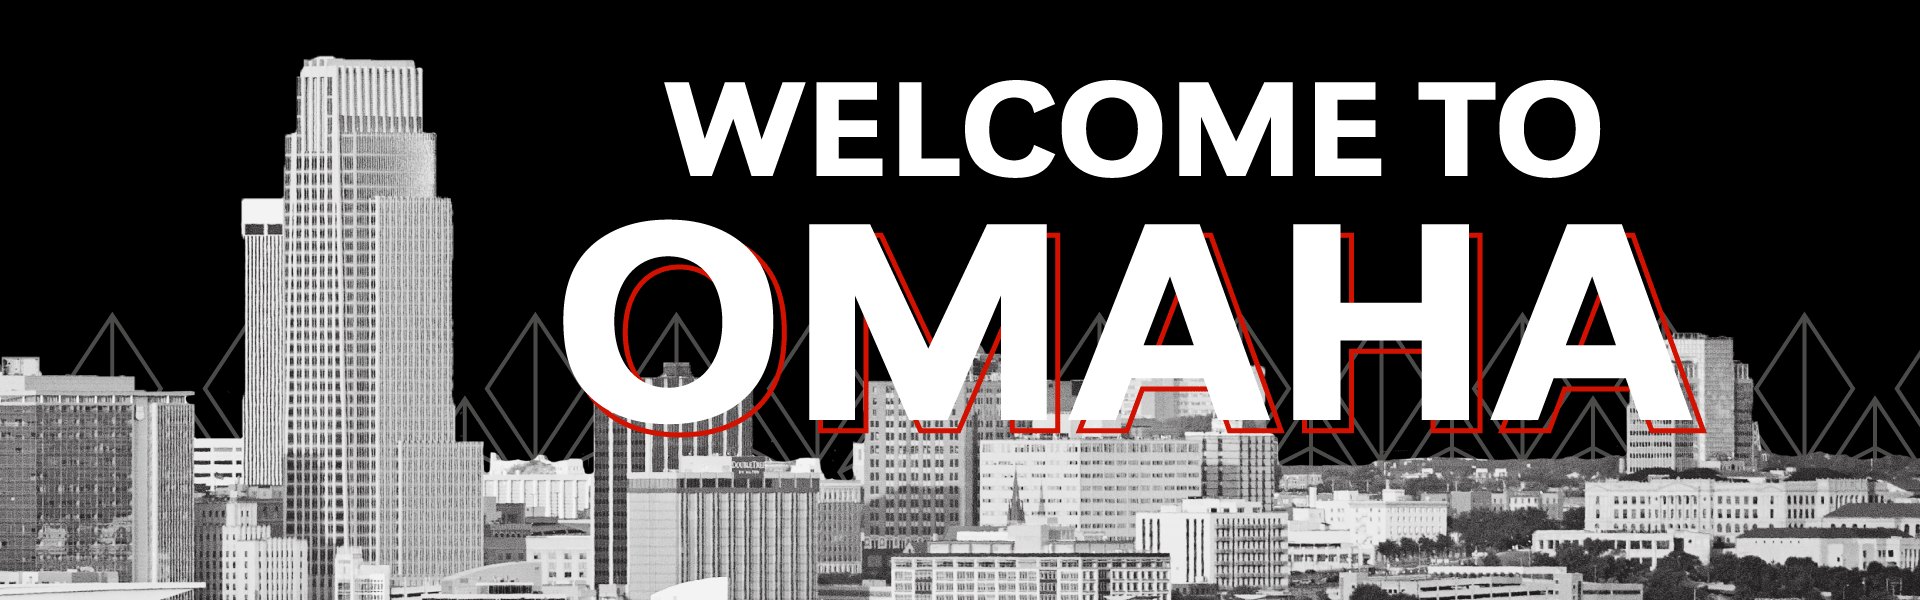 Omaha skyline with the words "Omaha" on top of it